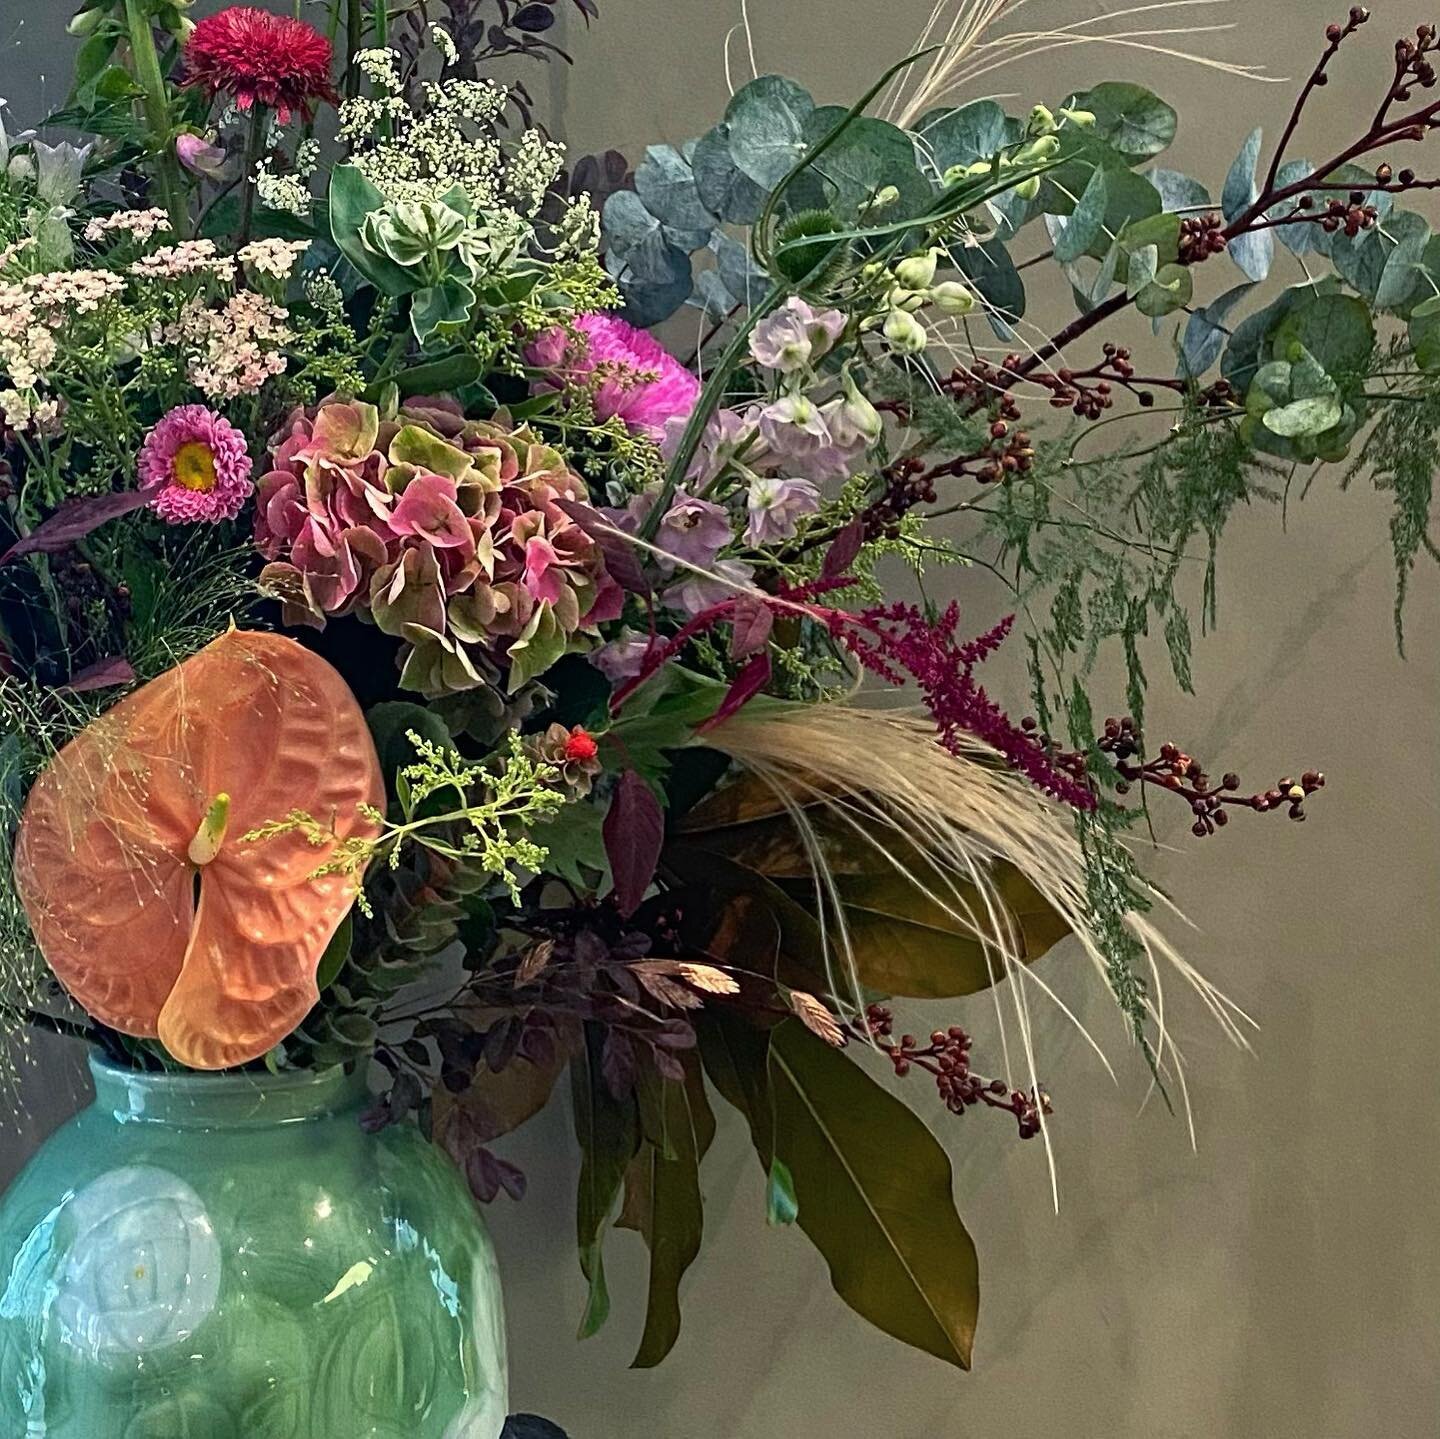 The flower celebration vase (or, basket in traditional sense) was curated with over 40 species of flowers &amp; foliage in our signature Lady Bird colour palette. 

Observe the life cycle of each stalk of flowers. One at a time. 

Congratulations @ha